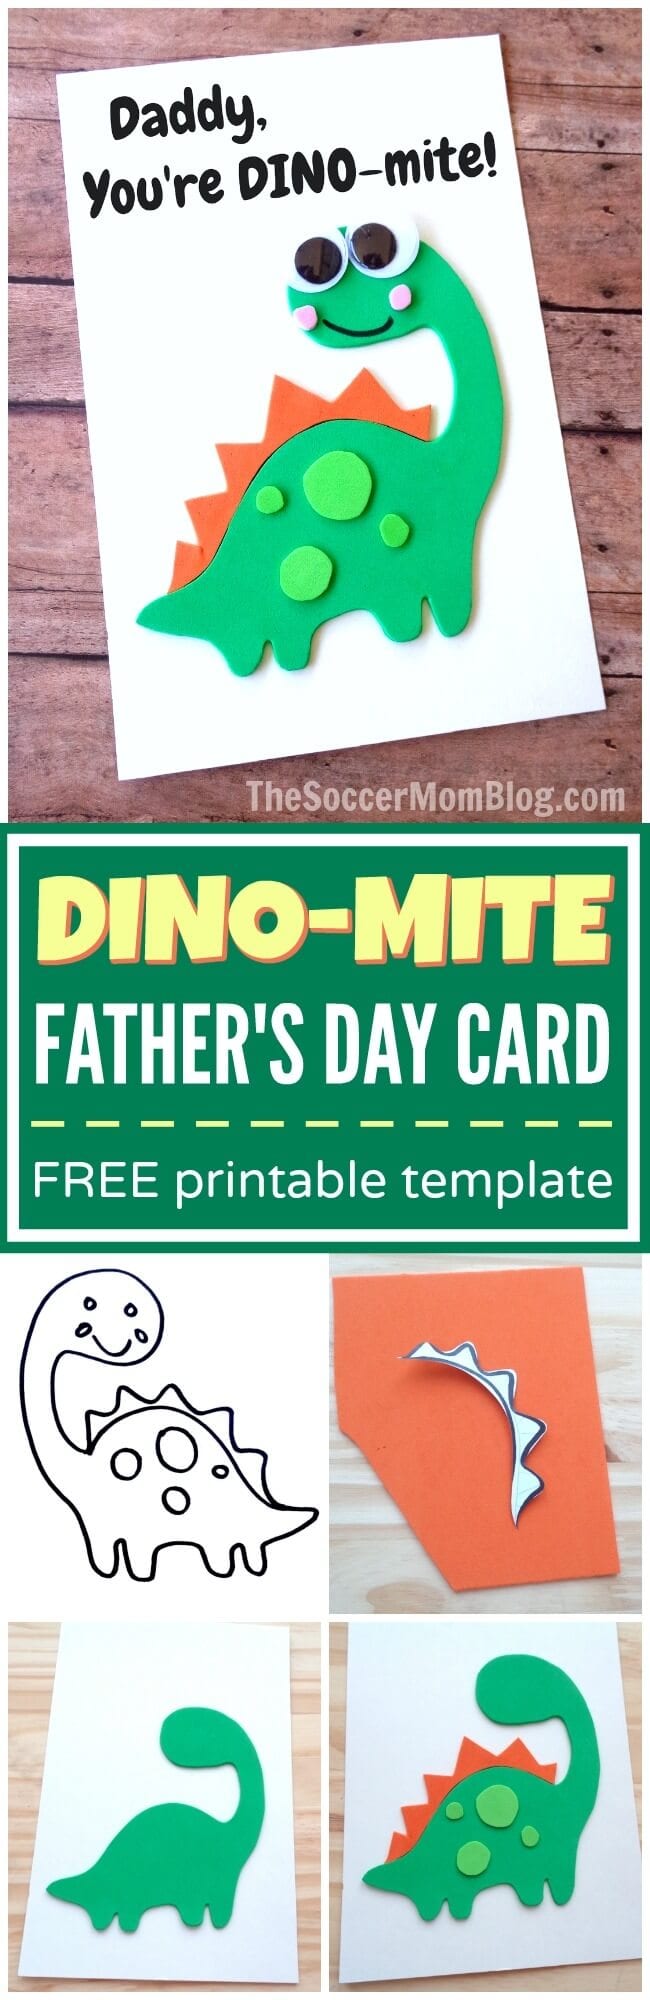 FAther's day crafts for kids Dino-Mite Card